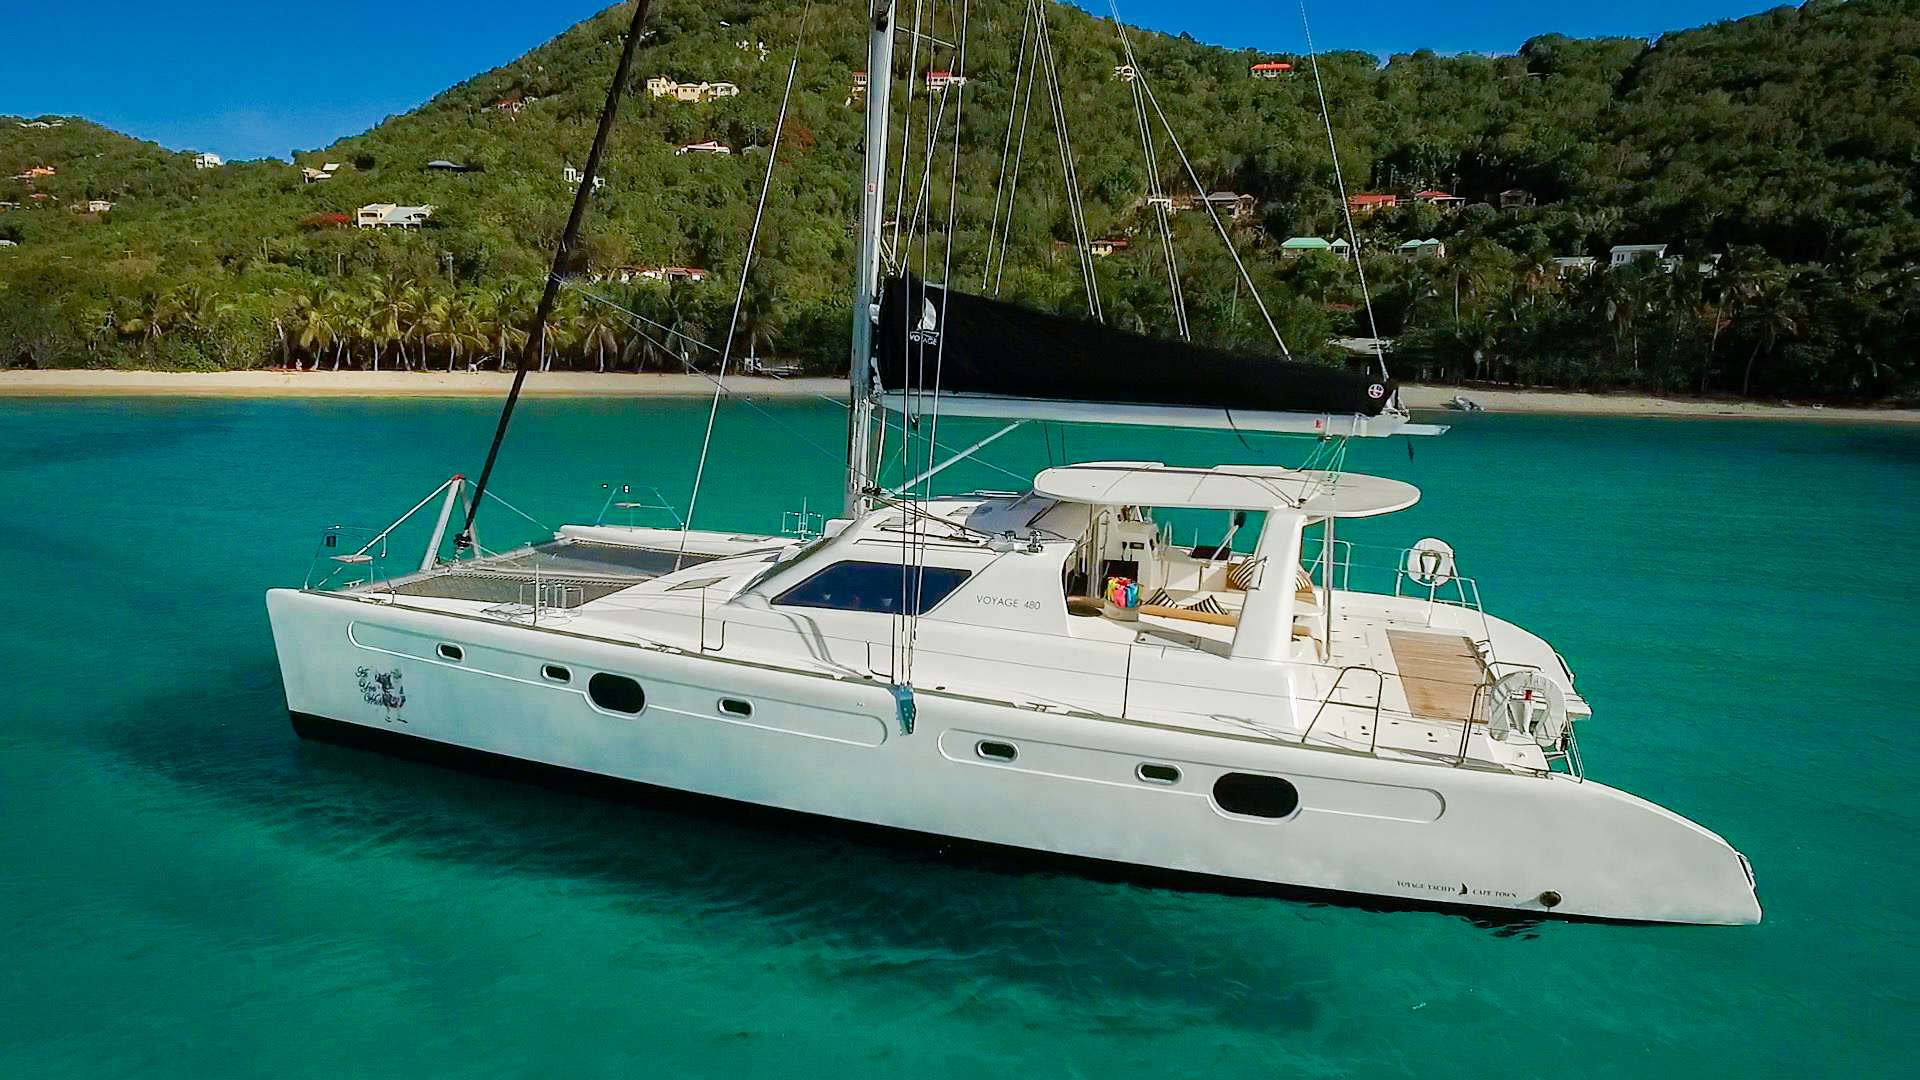 VOYAGE 480 Yacht Charter - Ritzy Charters